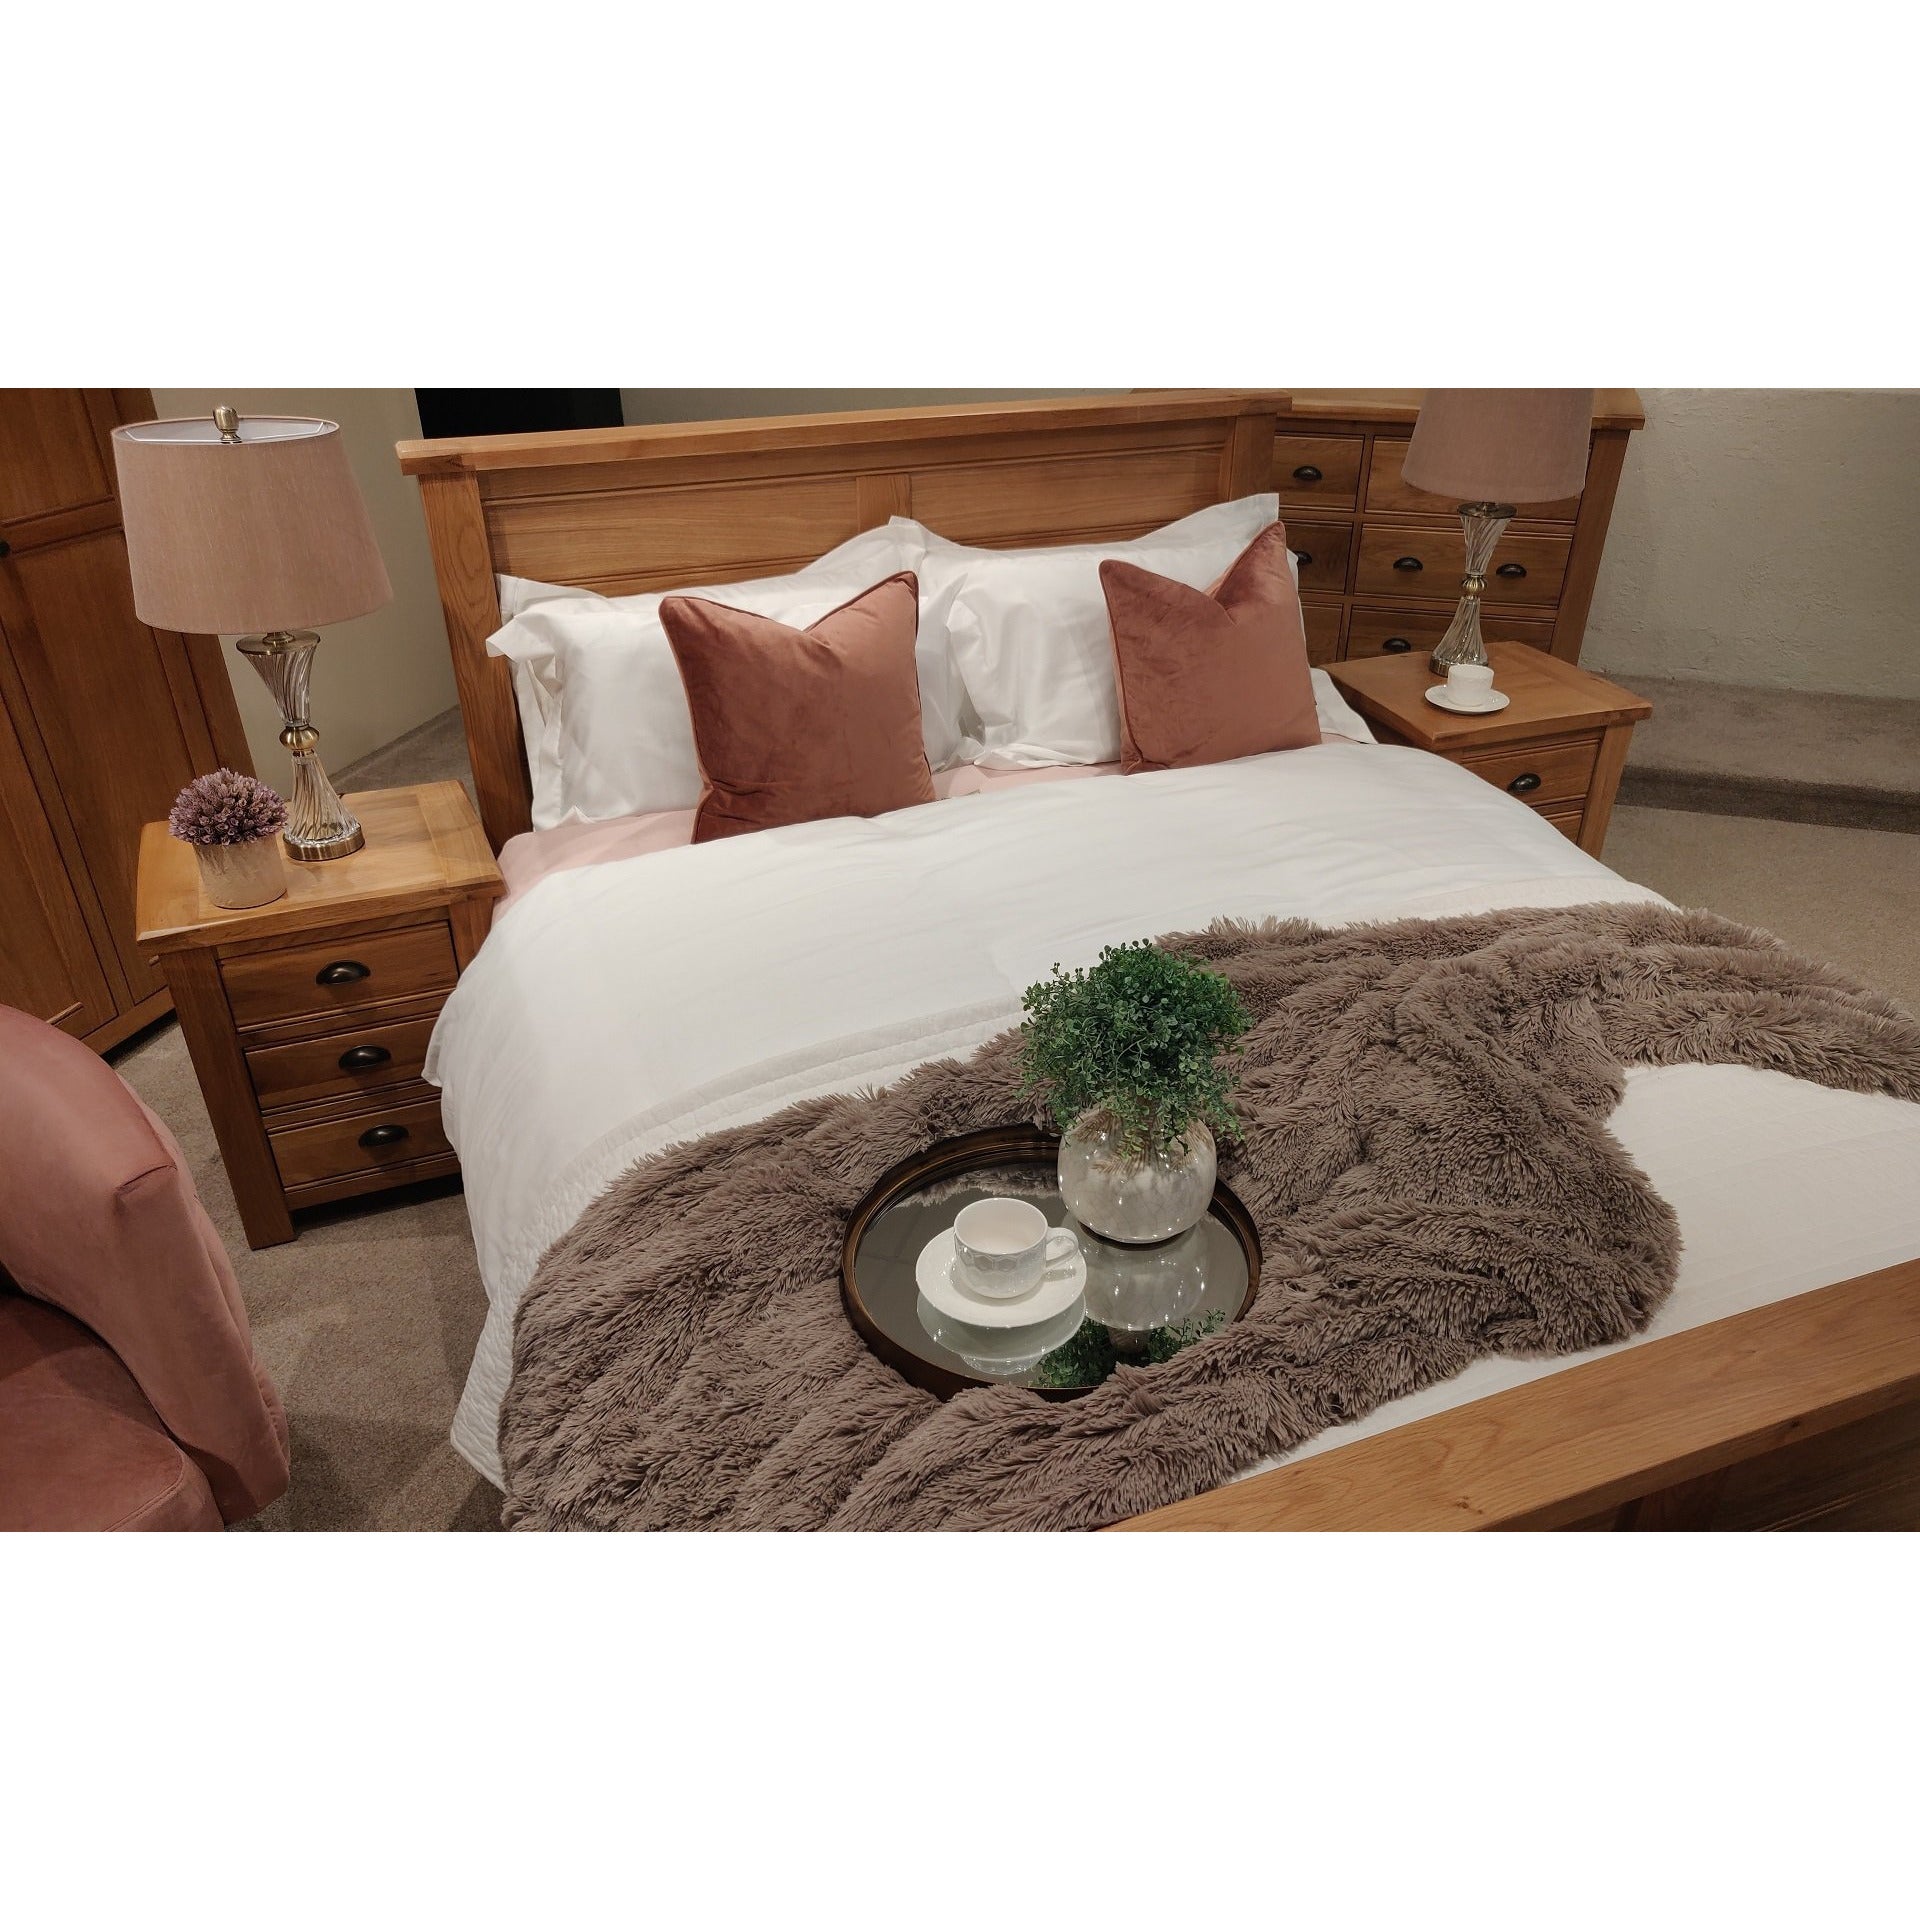 Blake 4ft6 Double Bed Frame